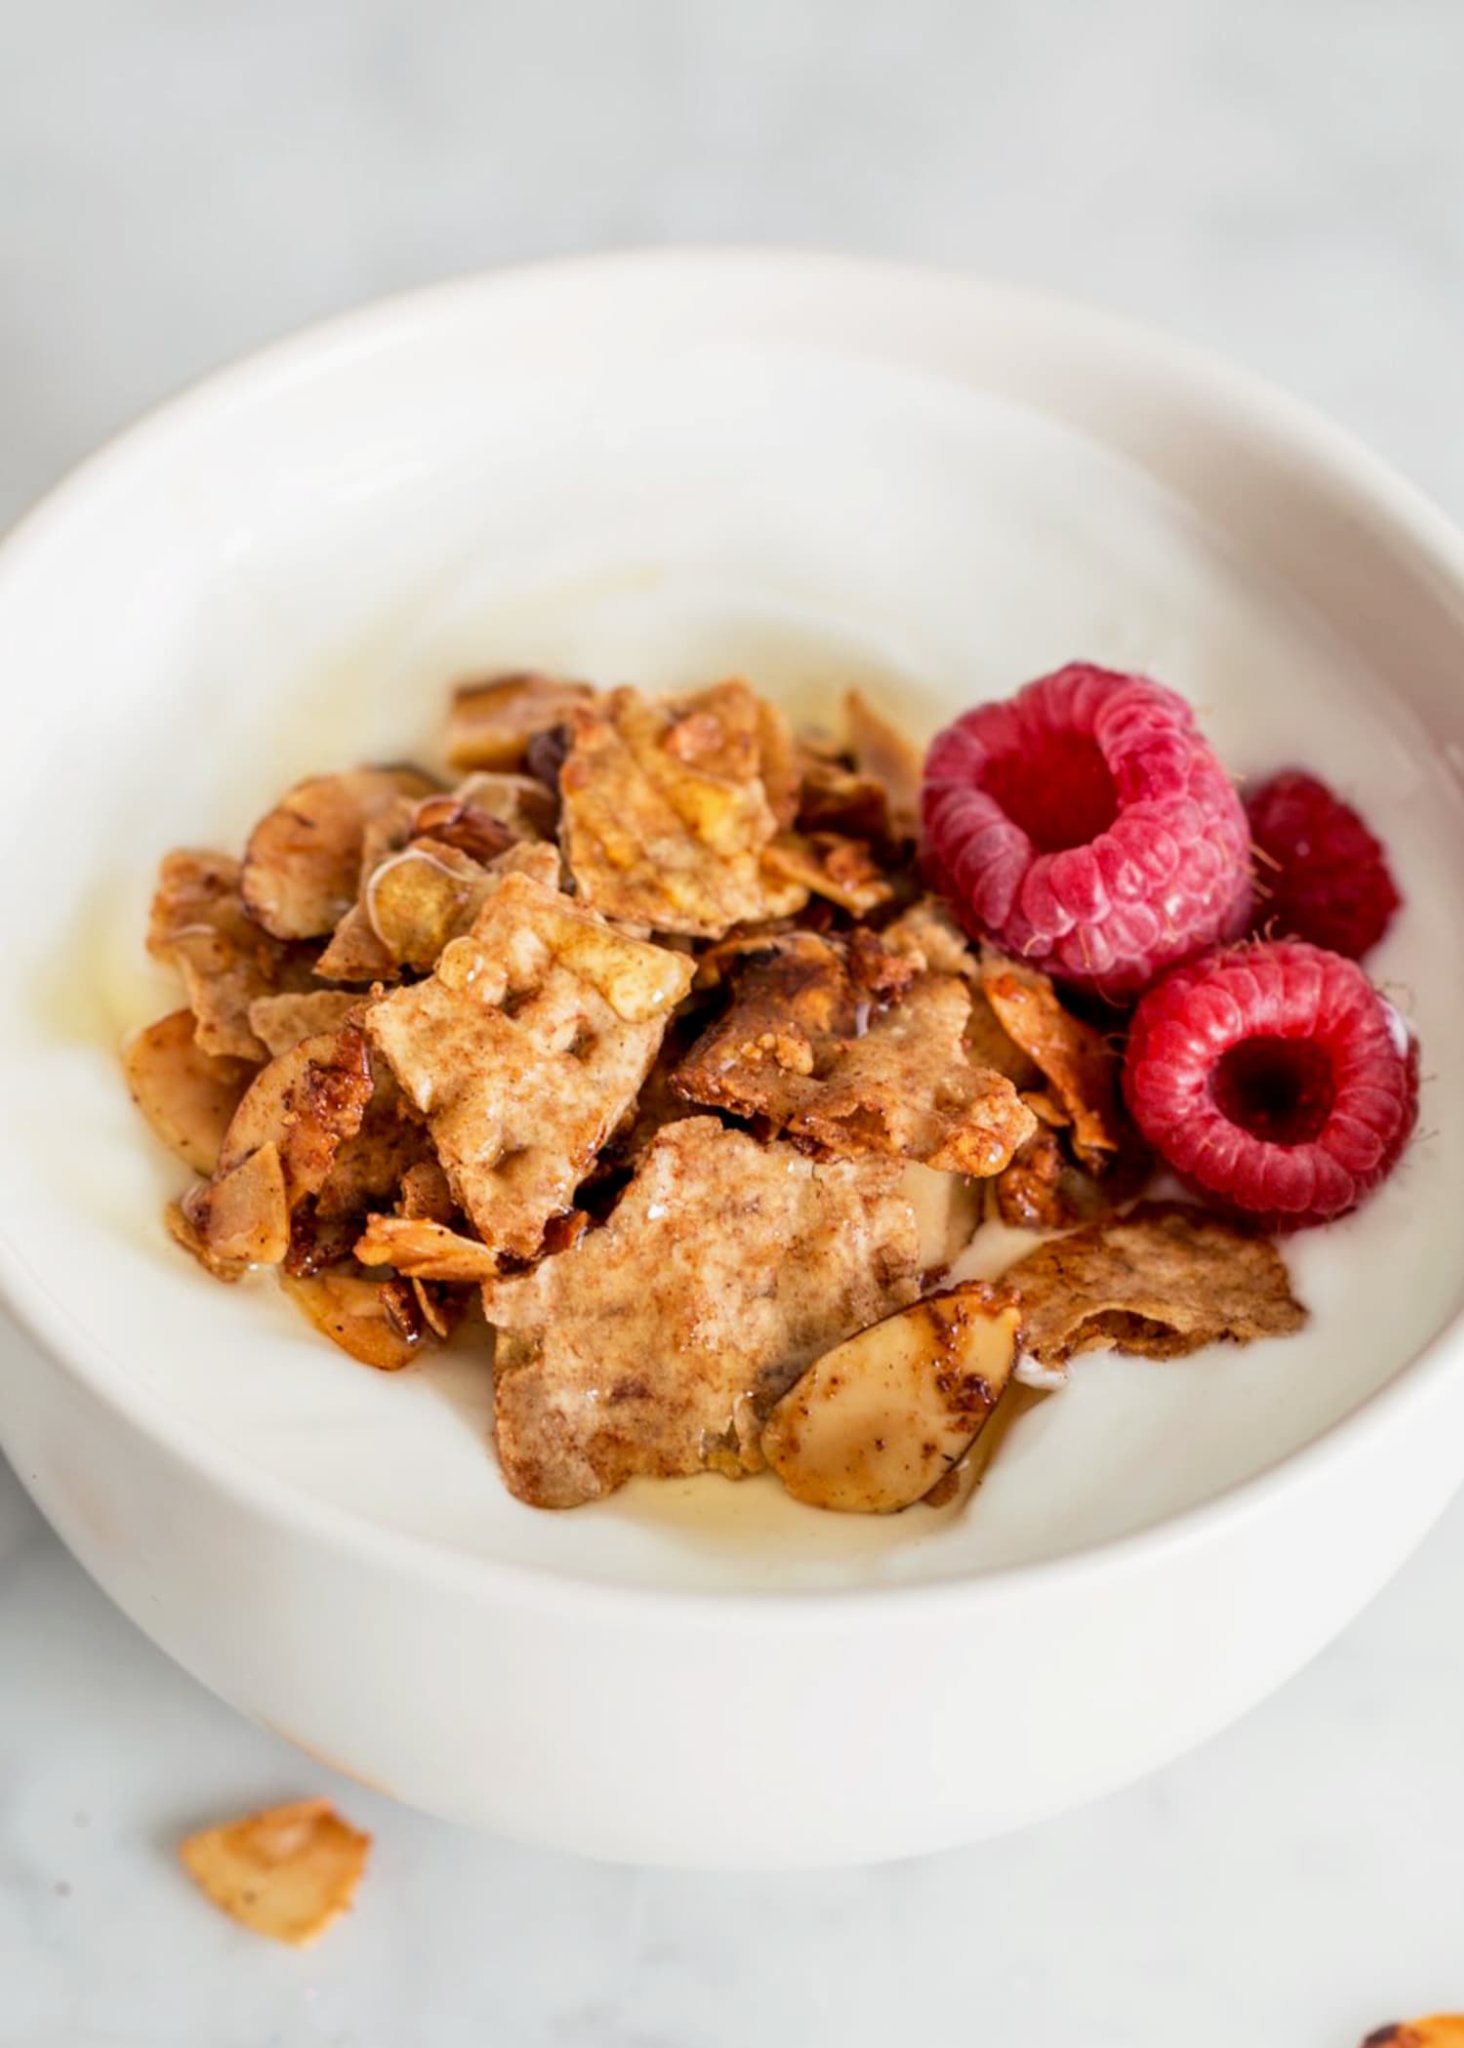 Make Batches of This Matzo Granola for Easy Breakfasts